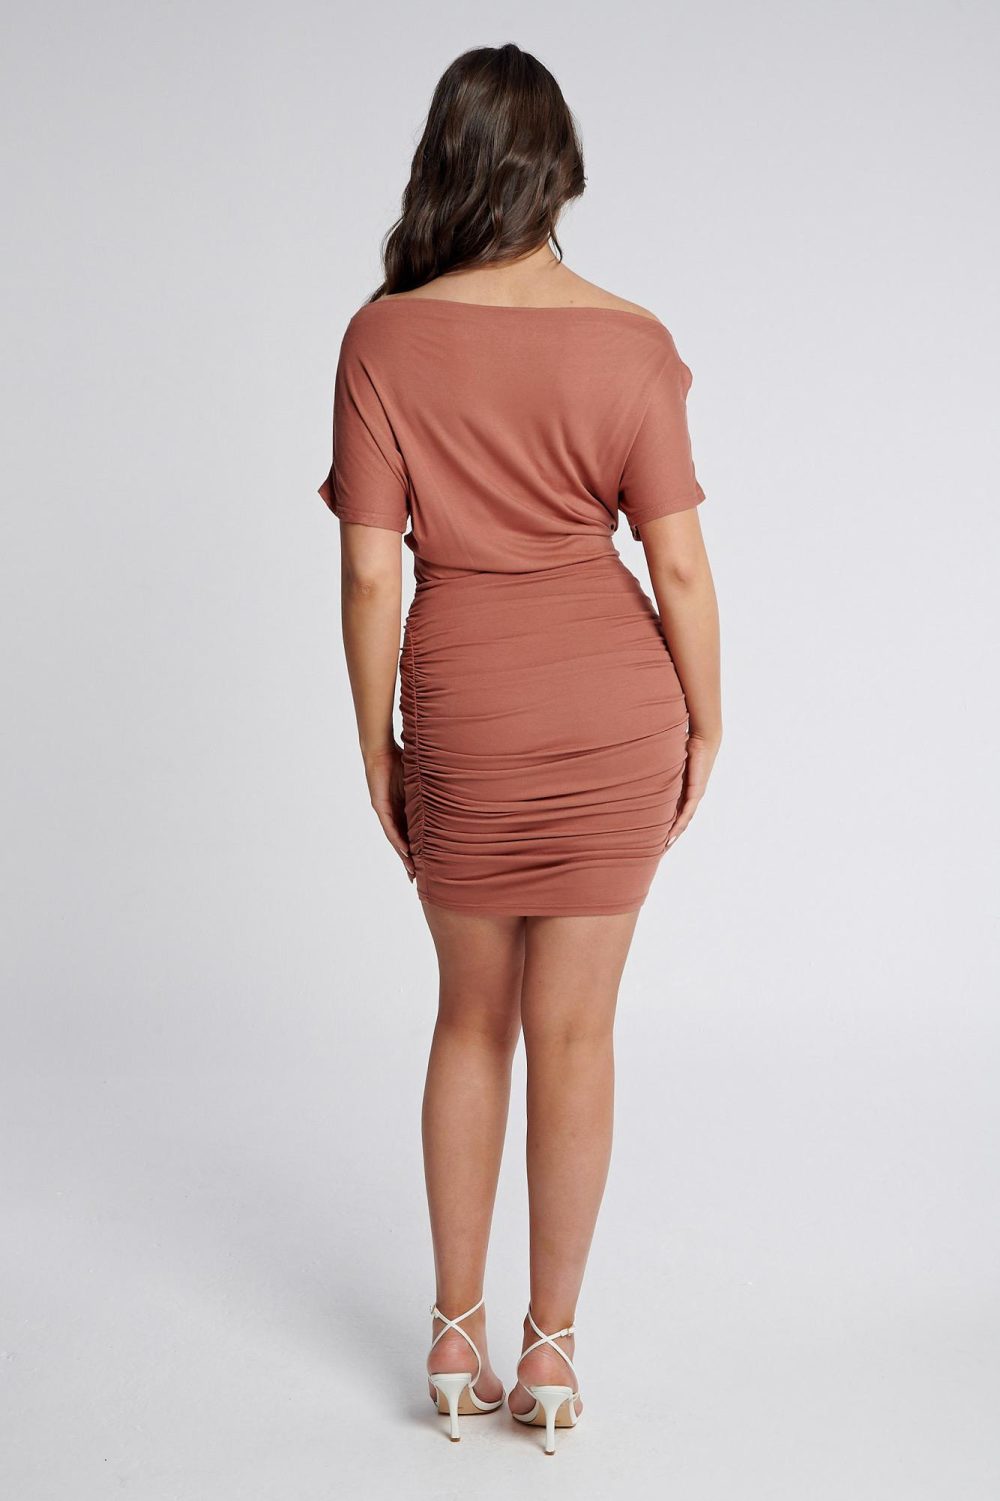 Ladies Dress Colour is Toffee